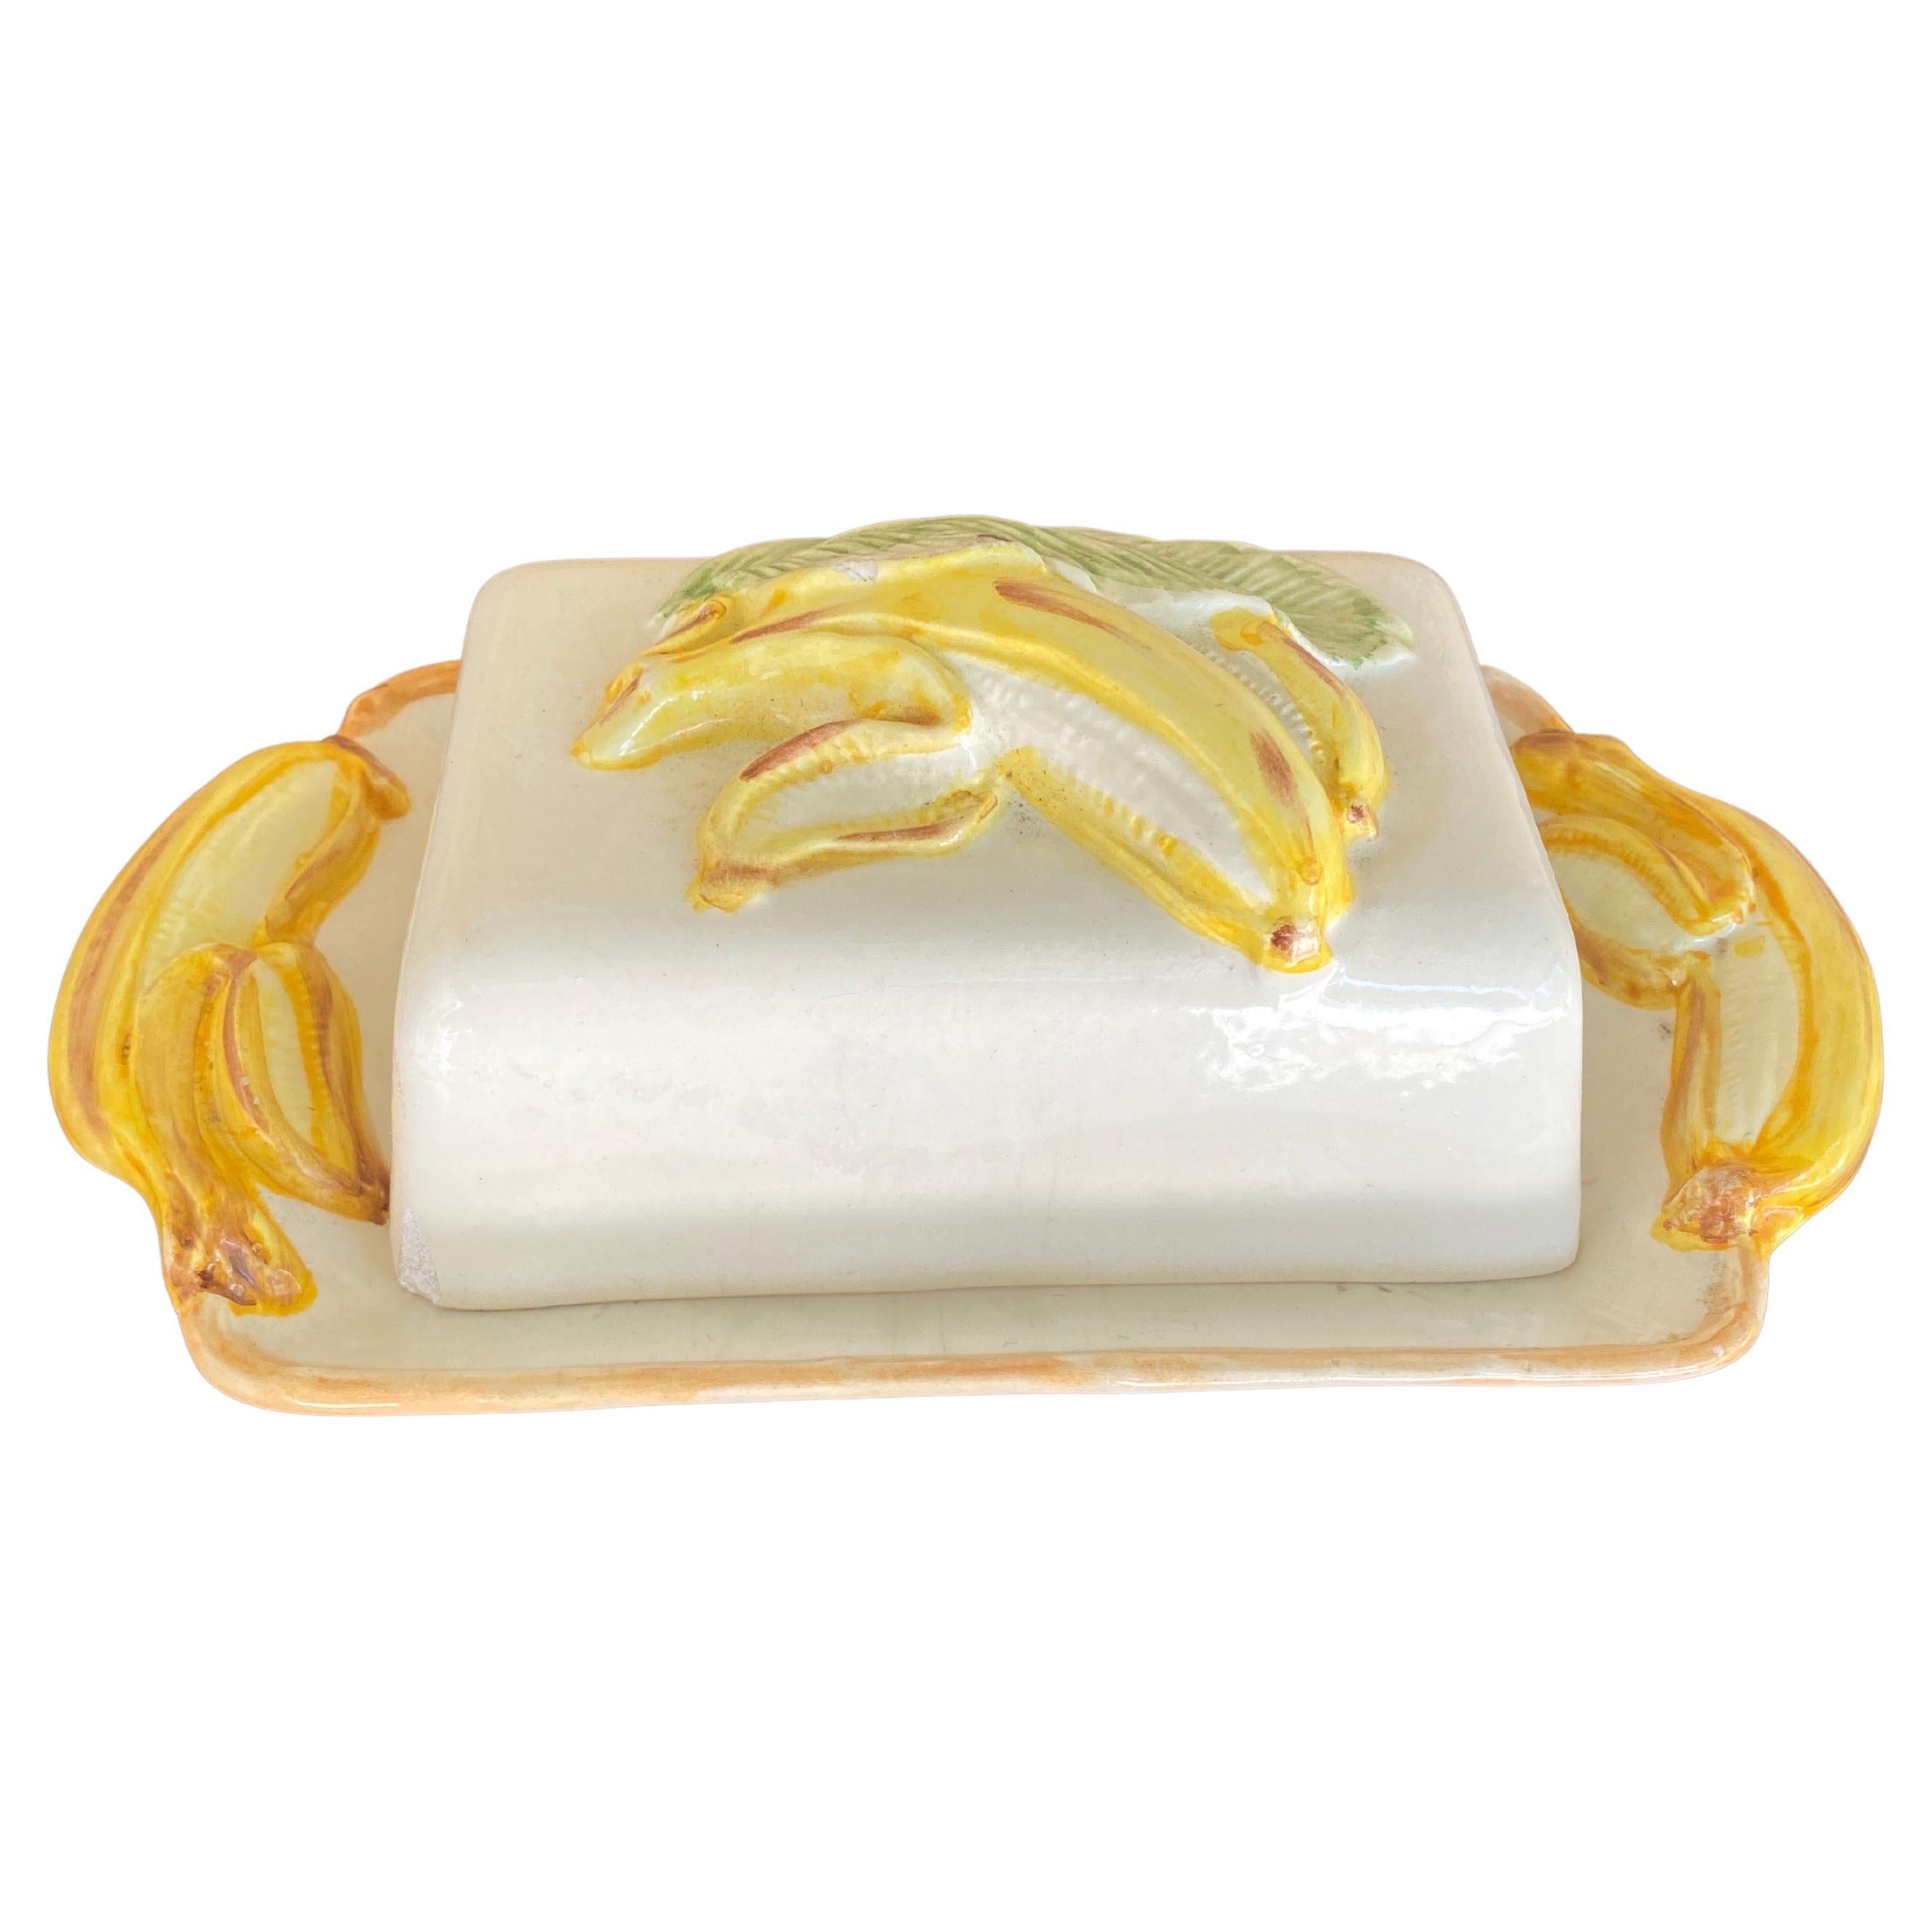 Butter Dish, Ceramic in the Style of Majolica, Yellow Color, Portugal circa 1970 For Sale